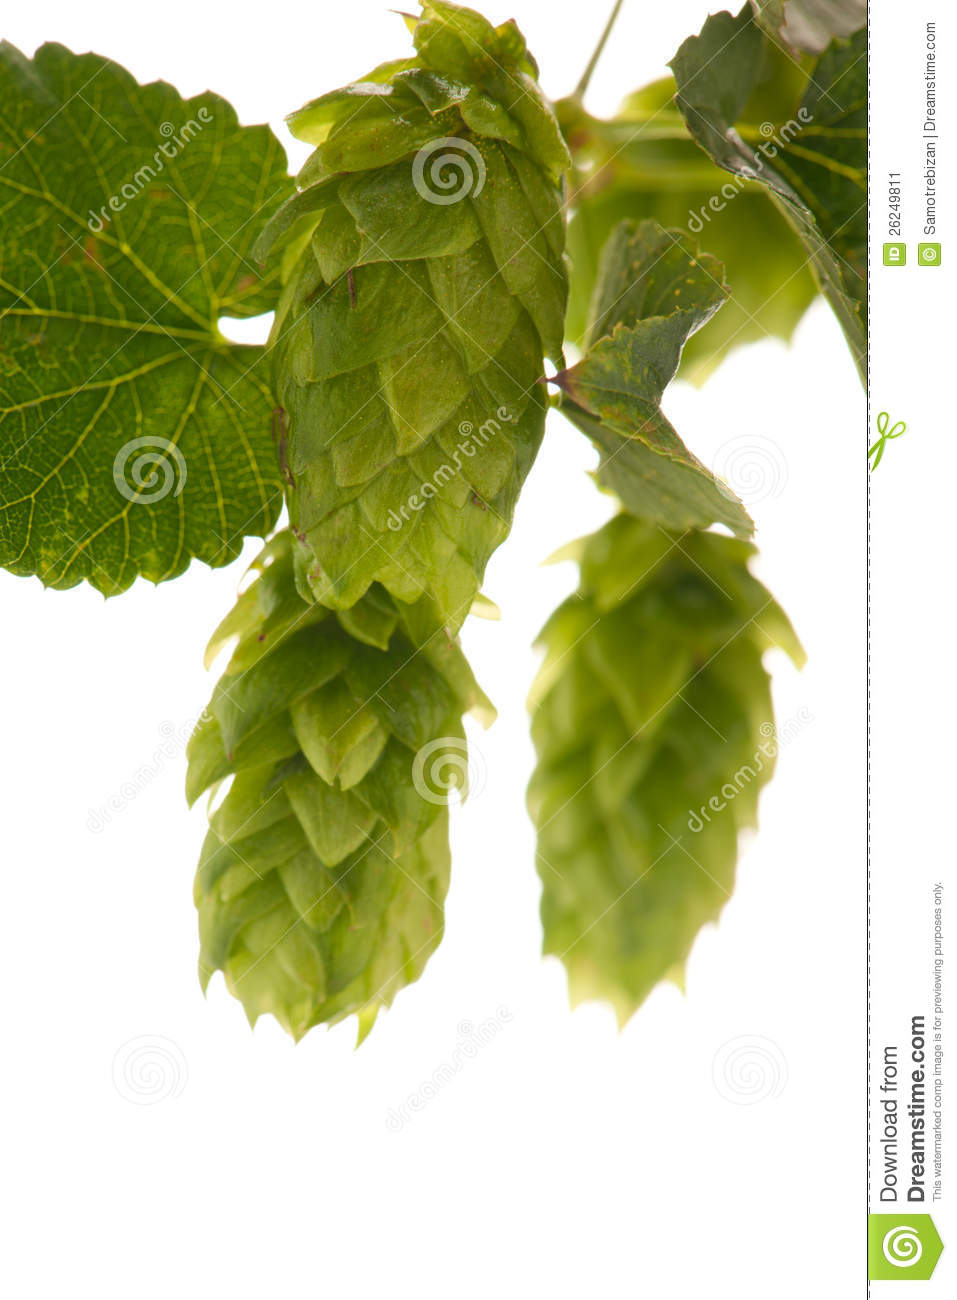 Hop Cones   Raw Material For Beer Production